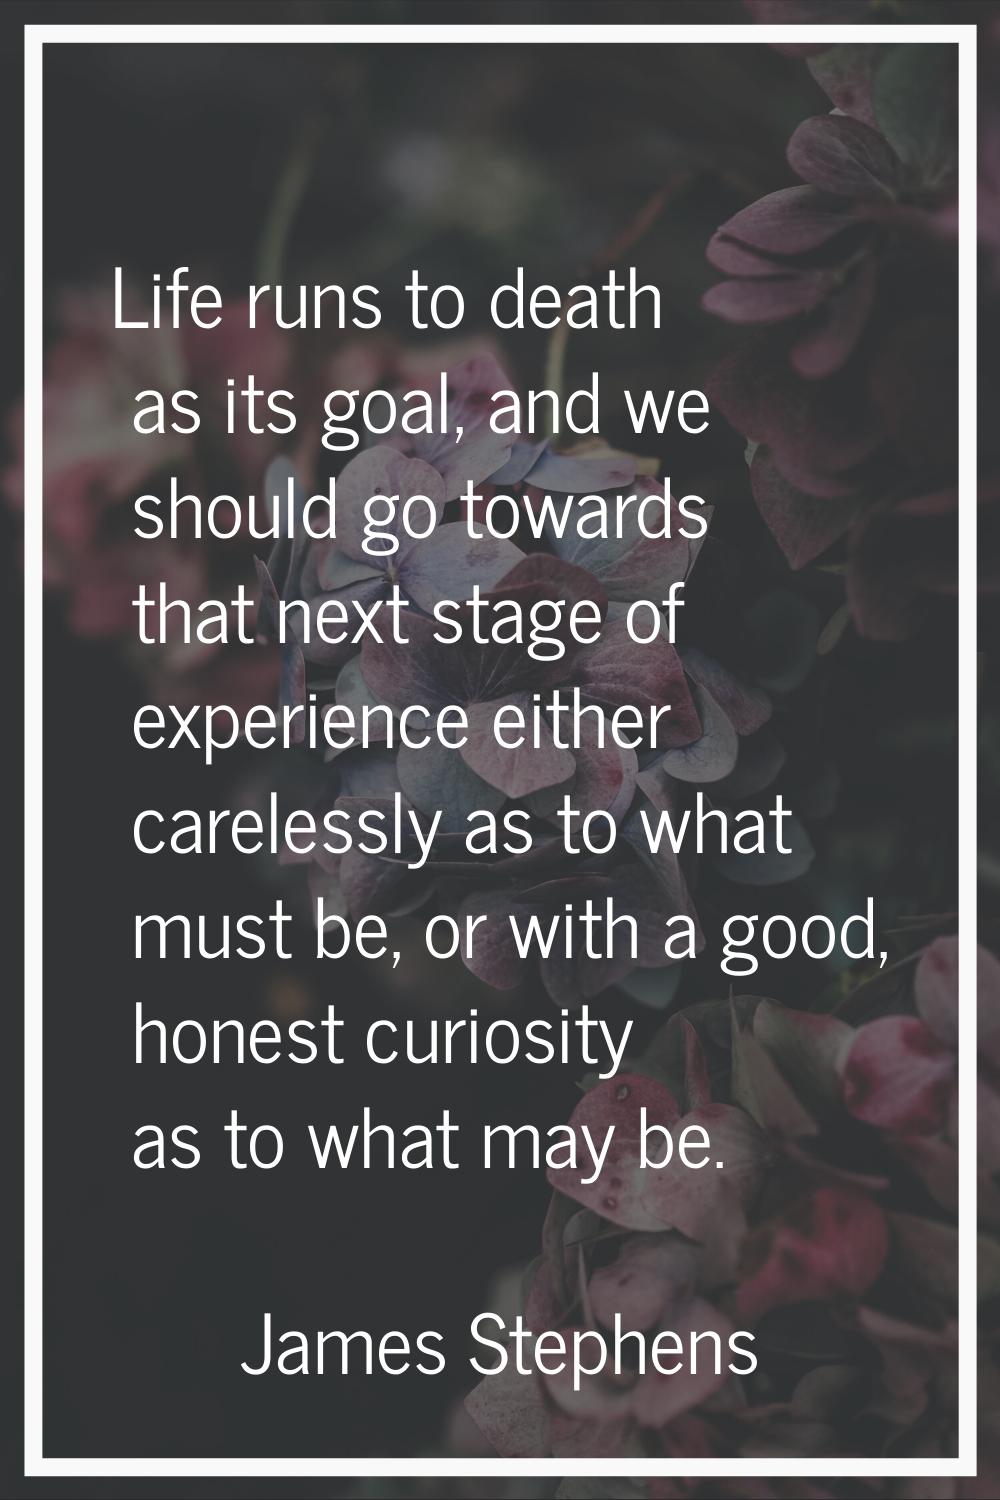 Life runs to death as its goal, and we should go towards that next stage of experience either carel